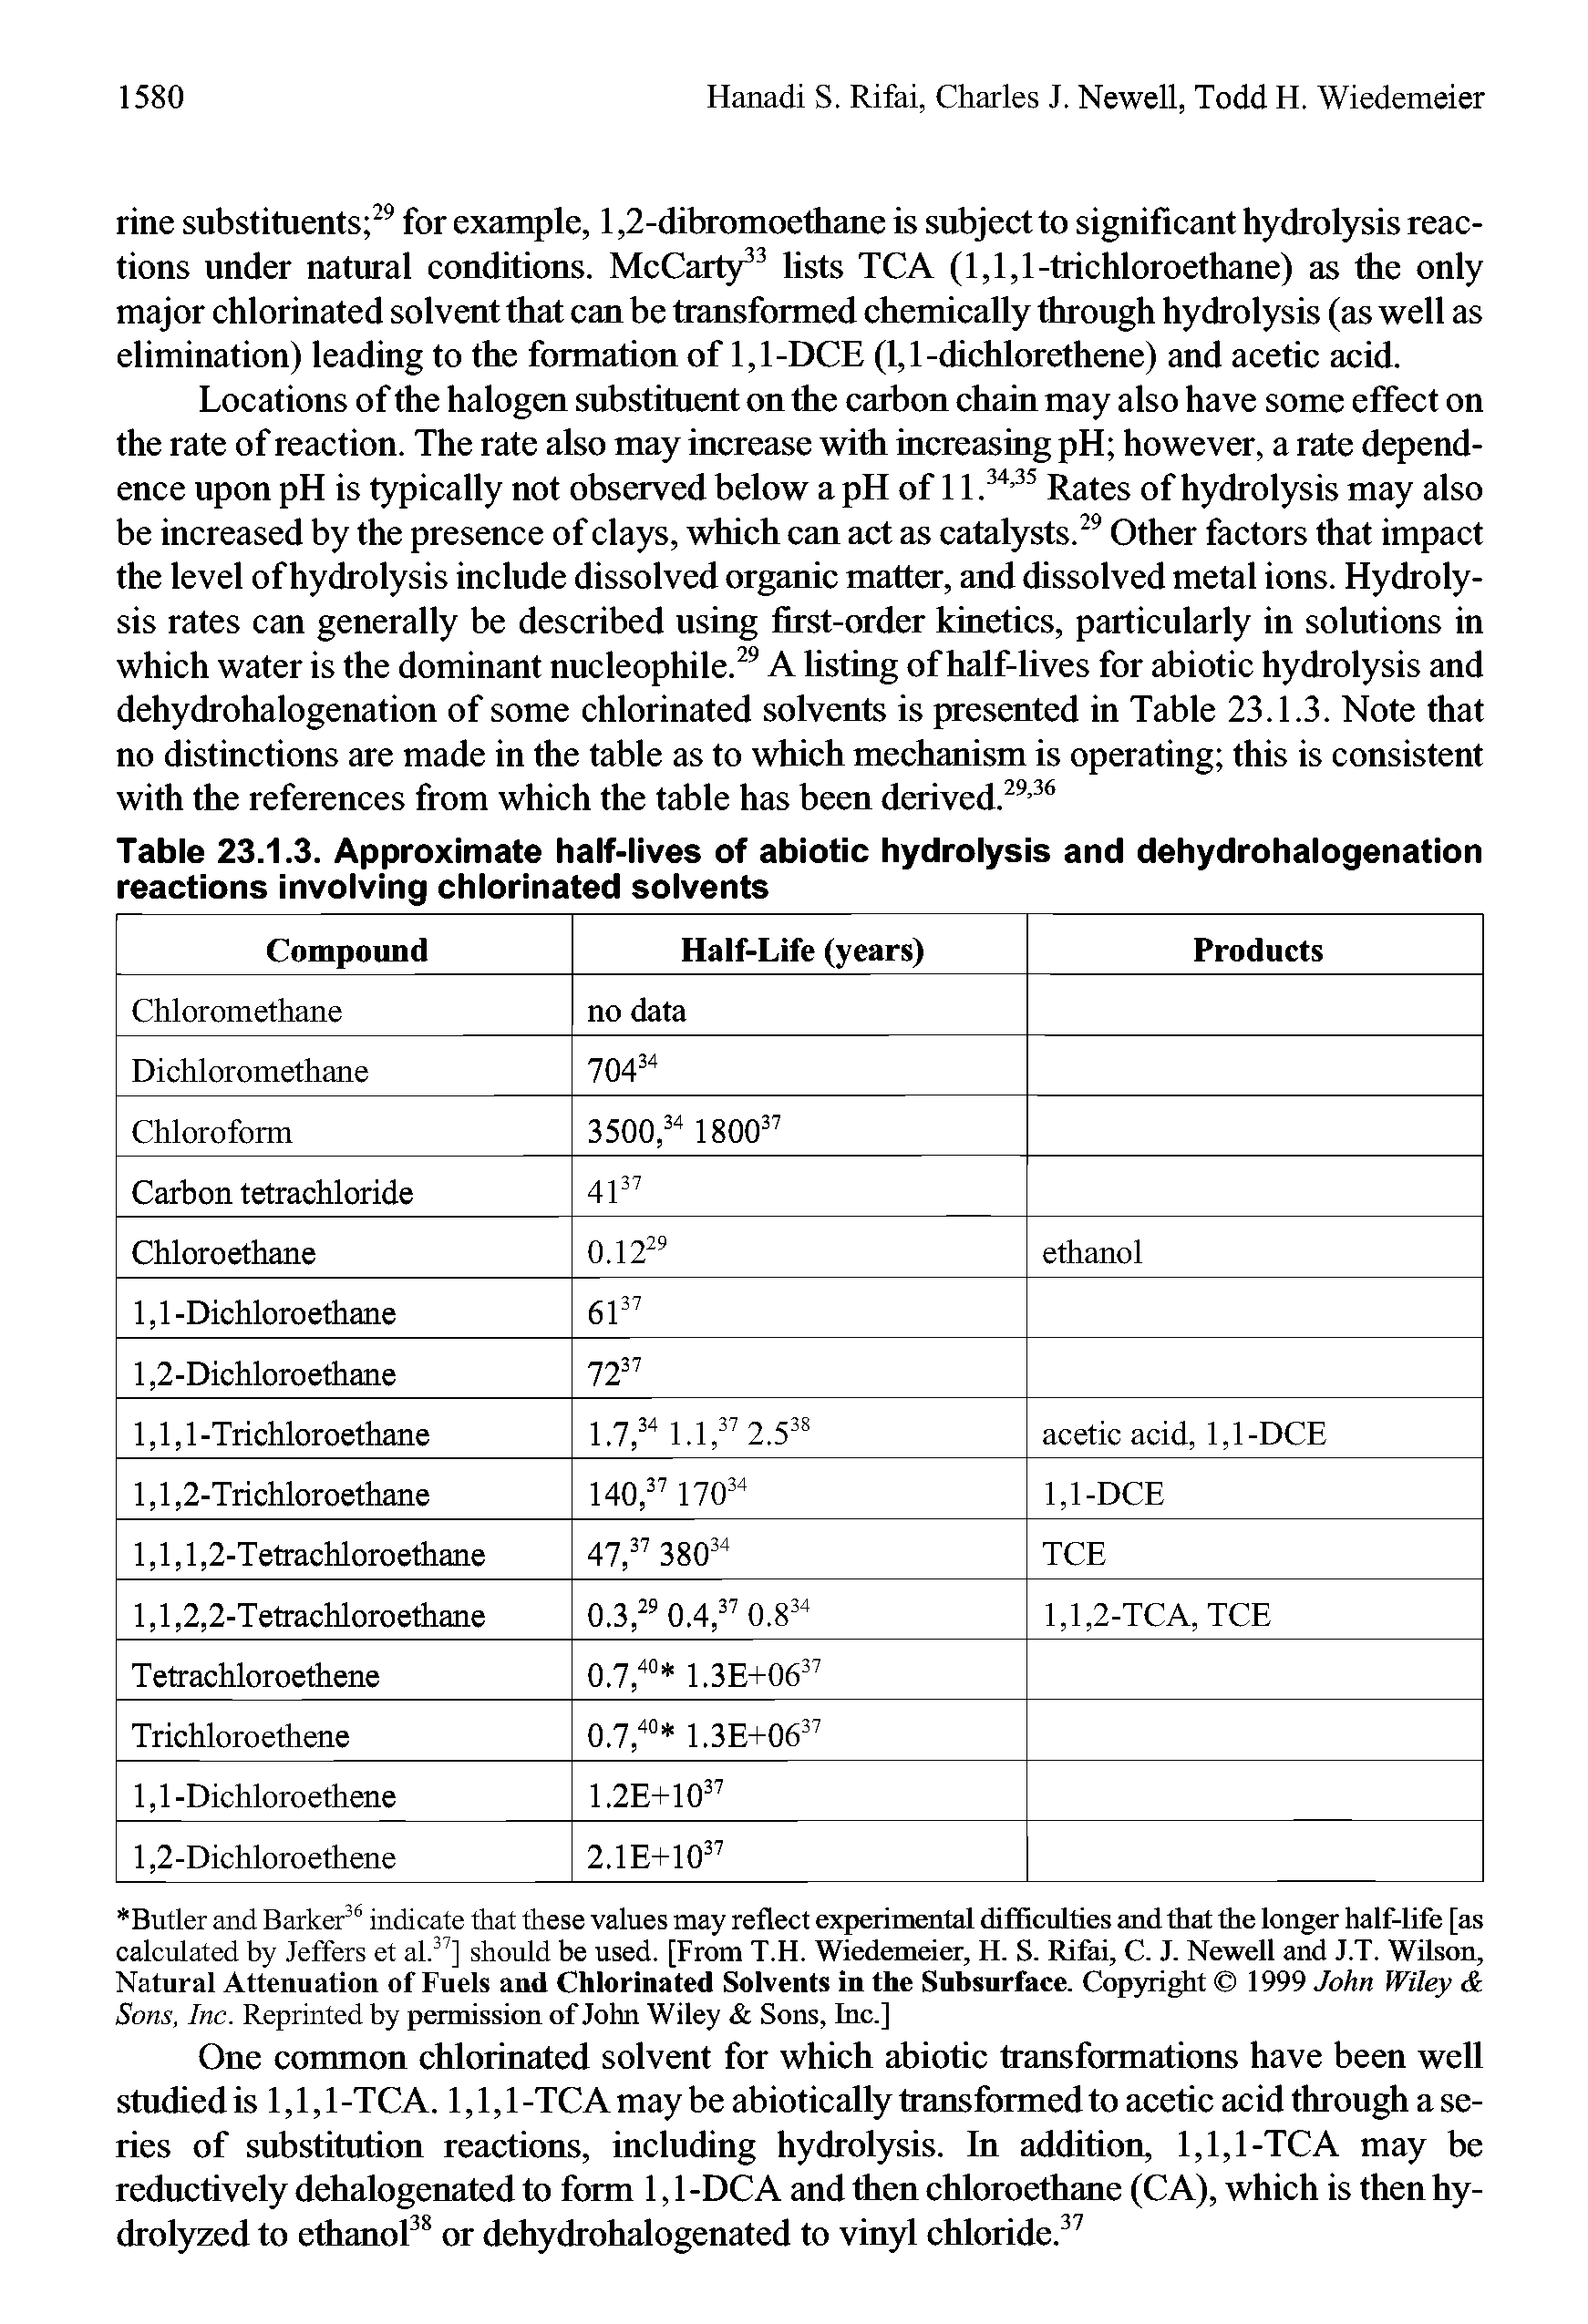 Table 23.1.3. Approximate half-lives of abiotic hydrolysis and dehydrohalogenation reactions involving chlorinated solvents...